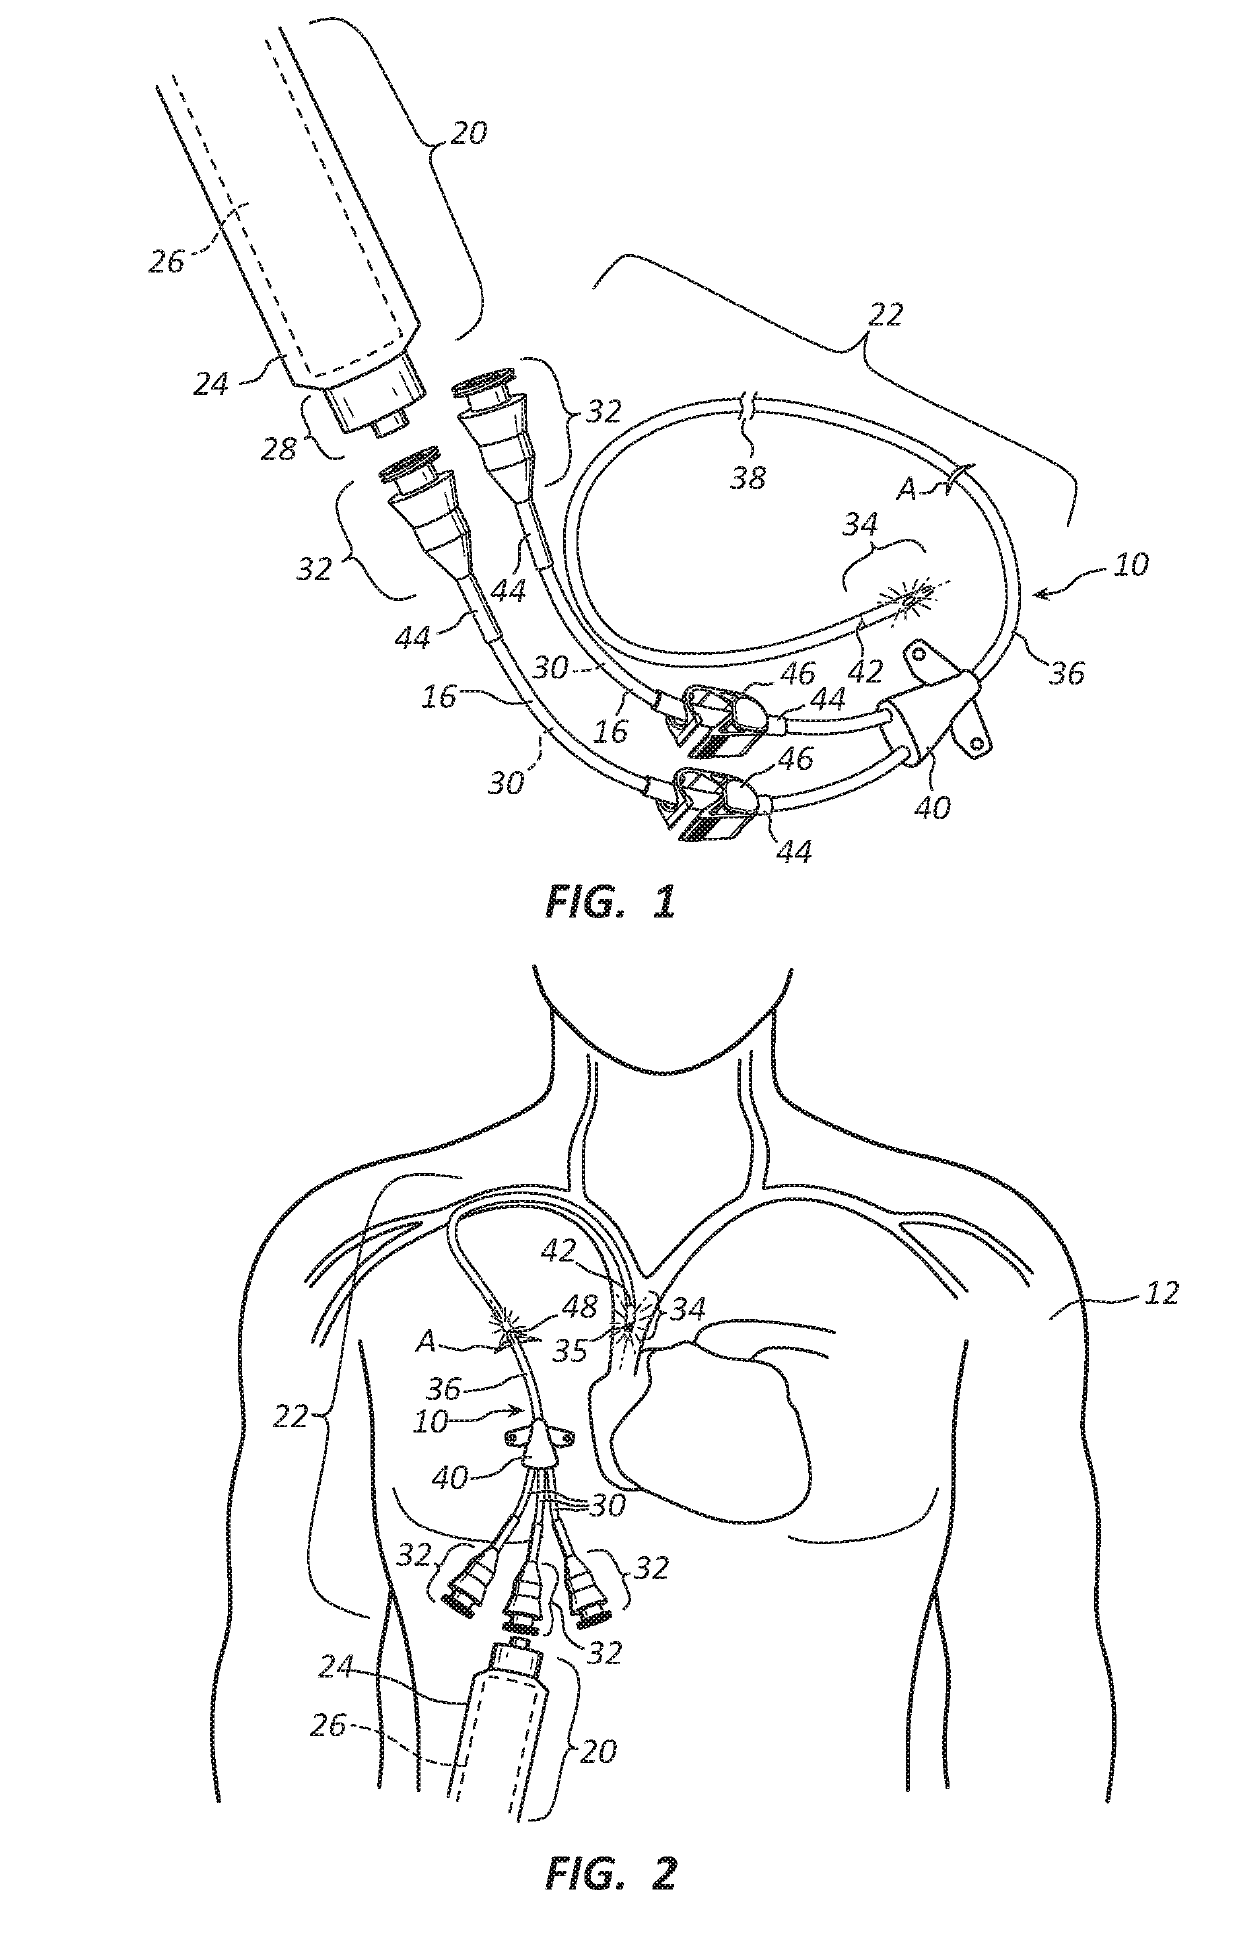 Methods and apparatus to deliver therapeutic, non-ultraviolet electromagnetic radiation versatilely via  a catheter residing in a body cavity